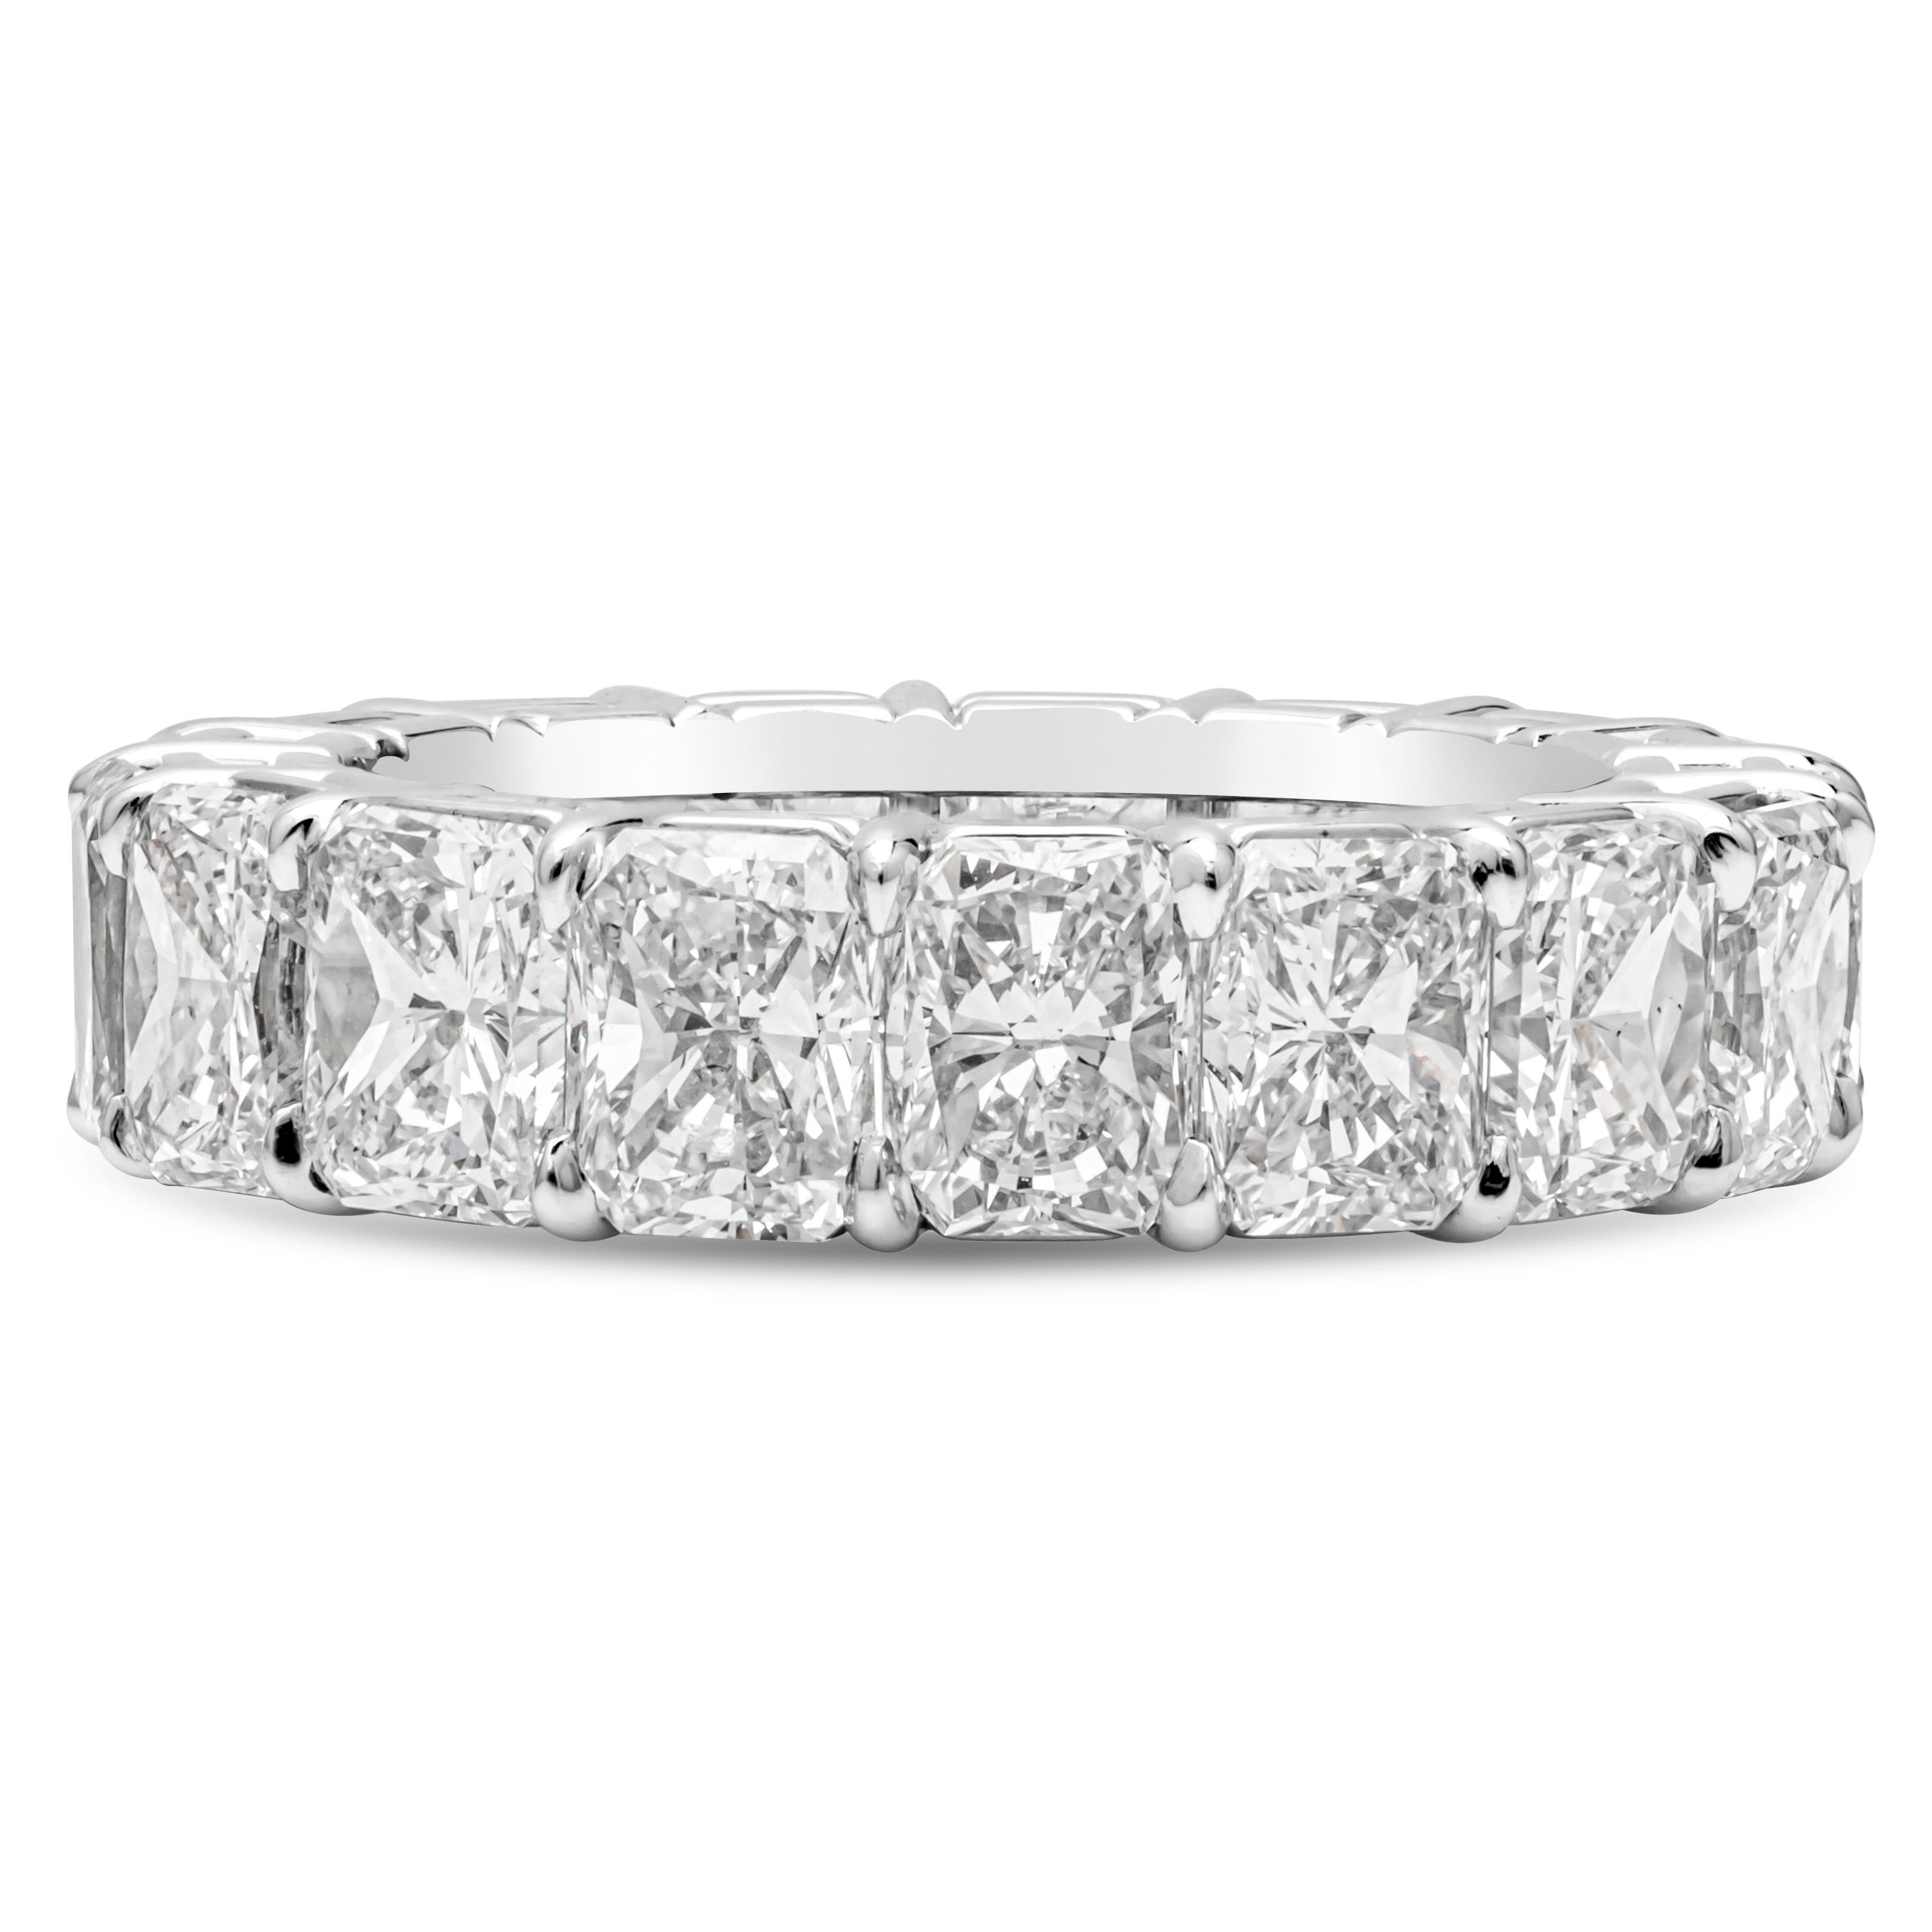 A brilliant and important eternity wedding band showcasing a row of radiant cut diamonds weighing 10.50 carats total, G-H Color and SI in clarity. Made with Platinum. Size 6.75 US.

Roman Malakov is a custom house, specializing in creating anything